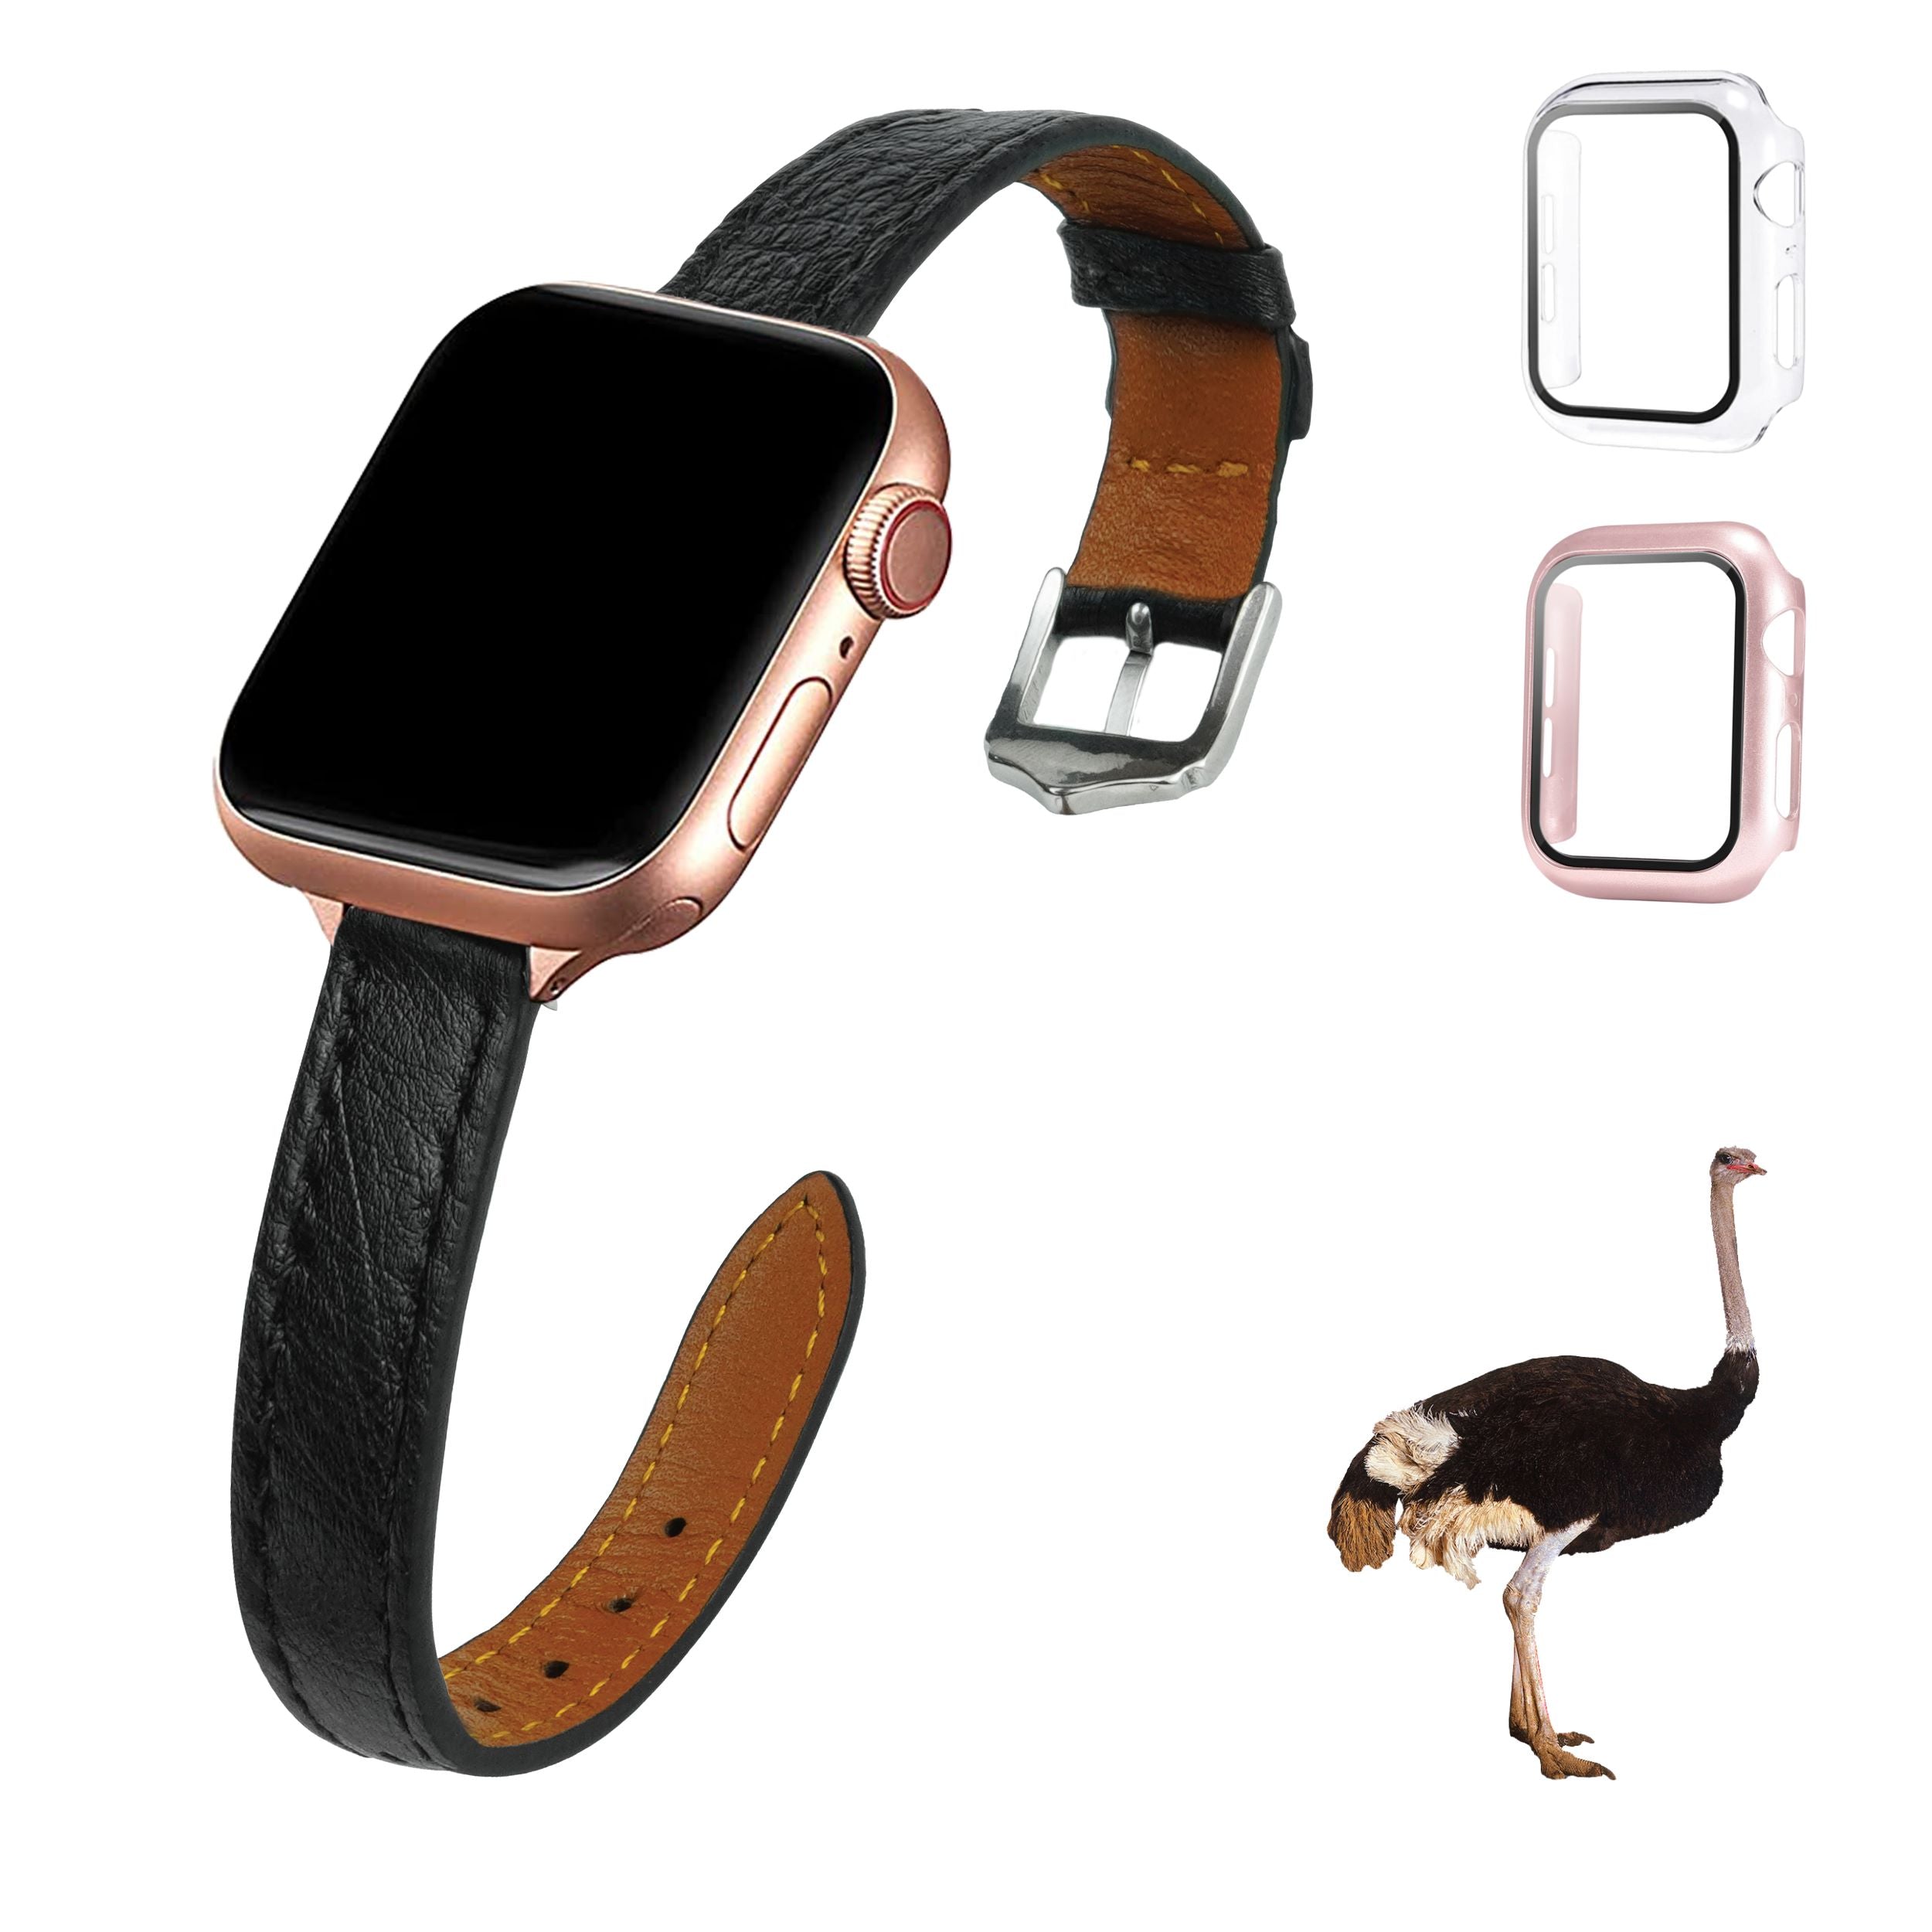 Black Flat Ostrich Leather Band Compatible Apple Watch Iwatch 38mm Screen Protector Case Silver Adapter Replacement Strap For Smartwatch Series 1 2 3 Leather Handmade AW-181S-W-38MM